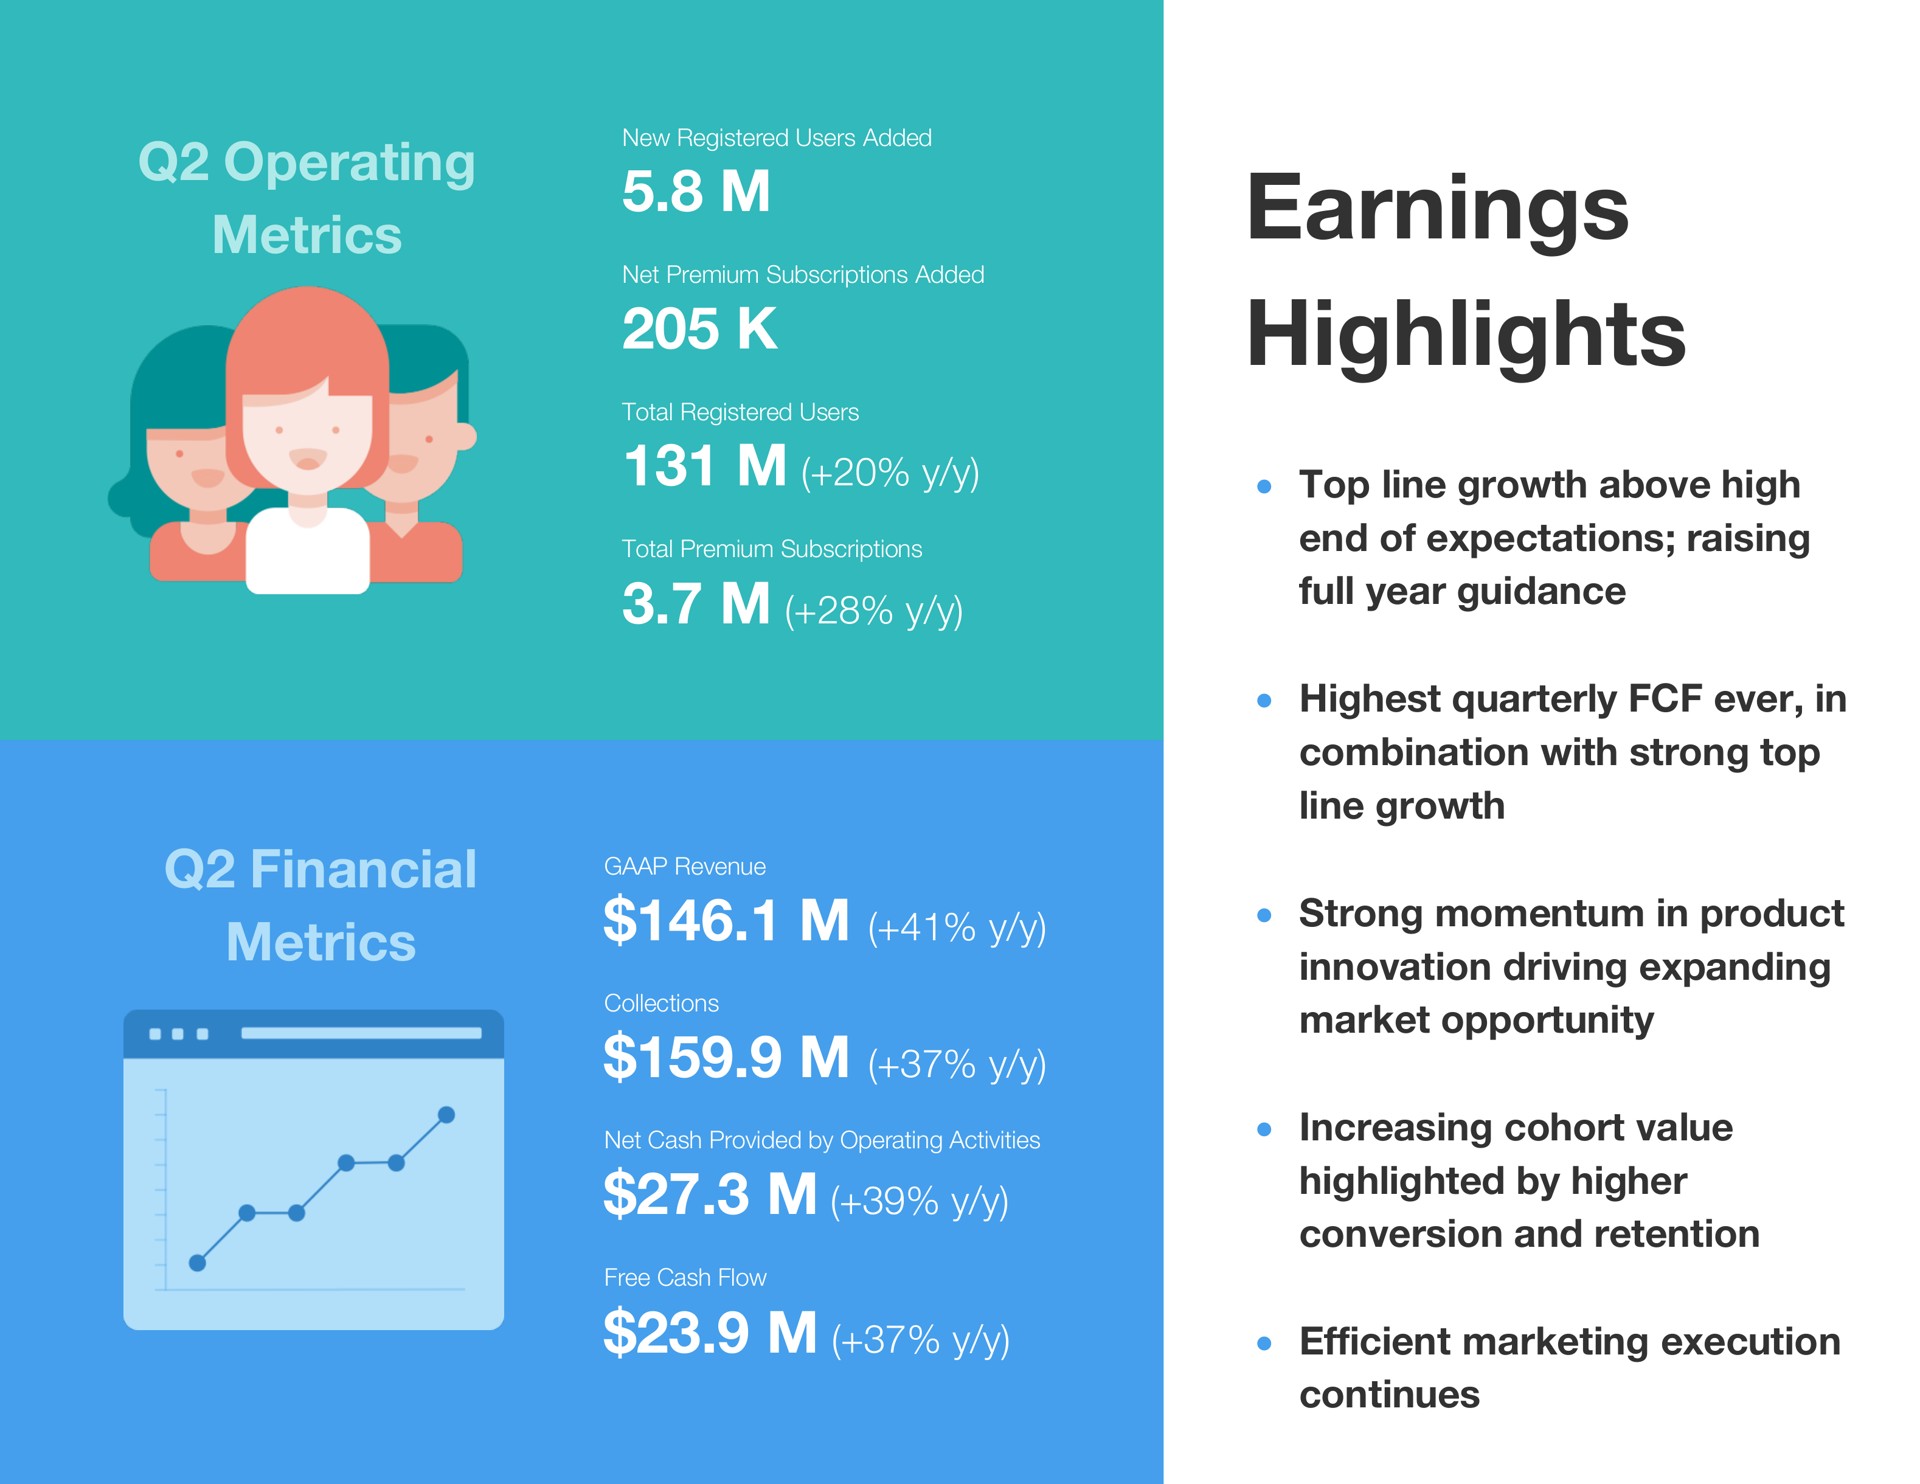 operating metrics financial metrics earnings highlights top line growth above high end of expectations raising full year guidance highest quarterly ever in combination with strong top line growth strong momentum in product innovation driving expanding market opportunity increasing cohort value highlighted by higher conversion and retention efficient marketing execution continues | Wix